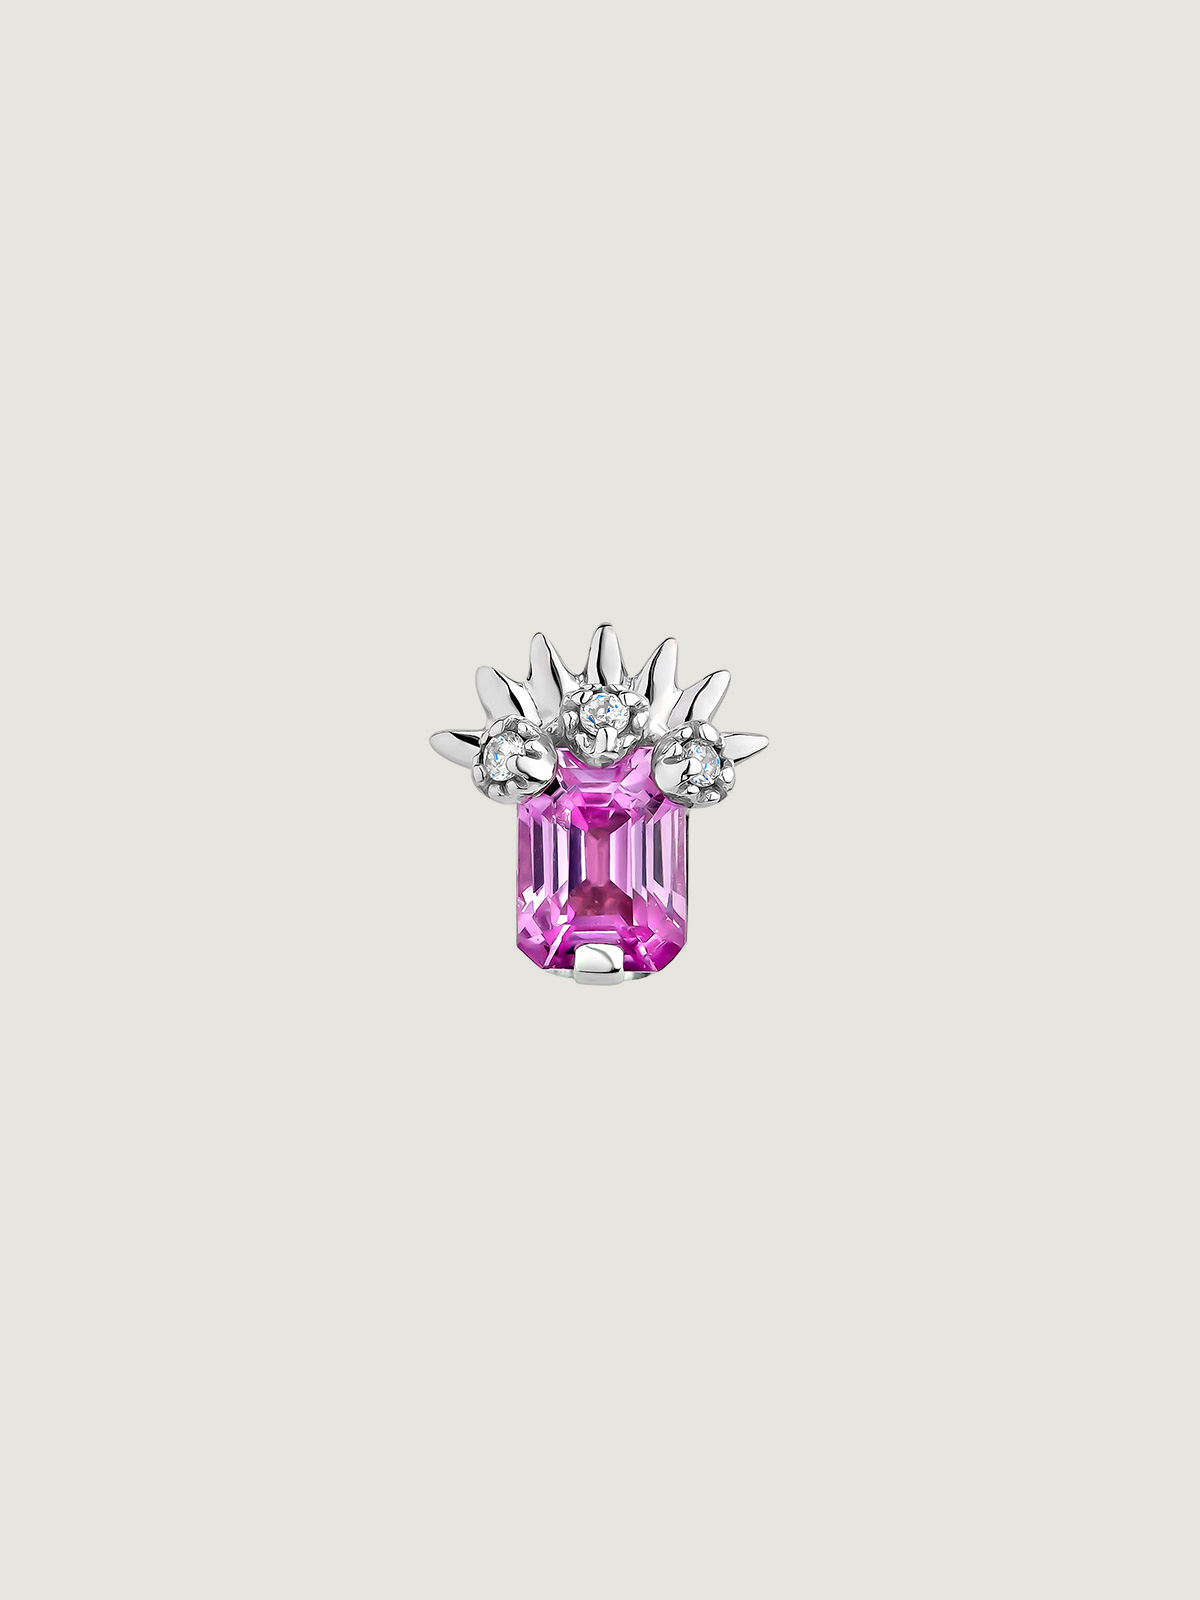 18k white gold piercing with central pink sapphire and diamonds.